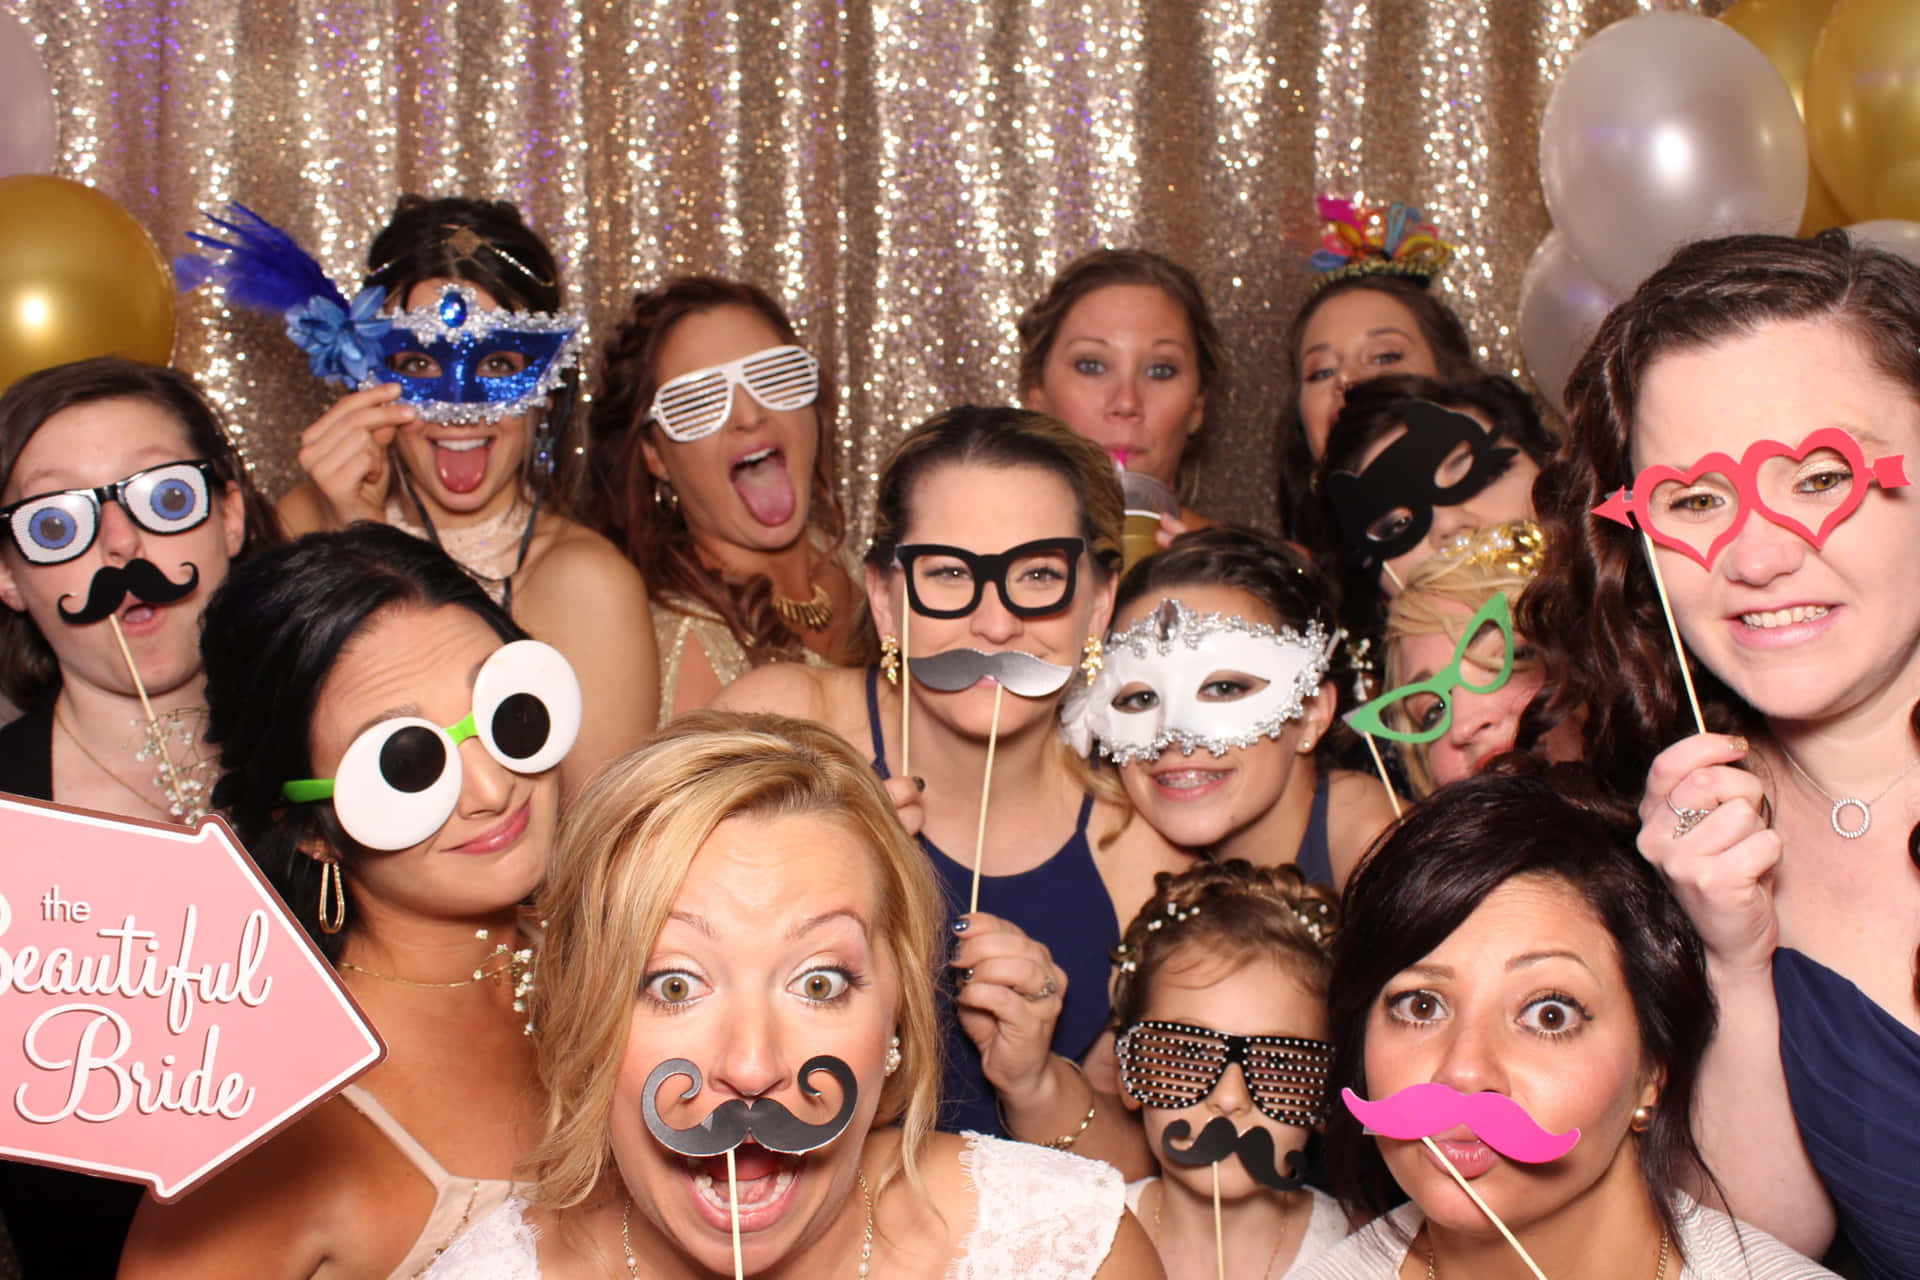 Get silly at the photobooth!